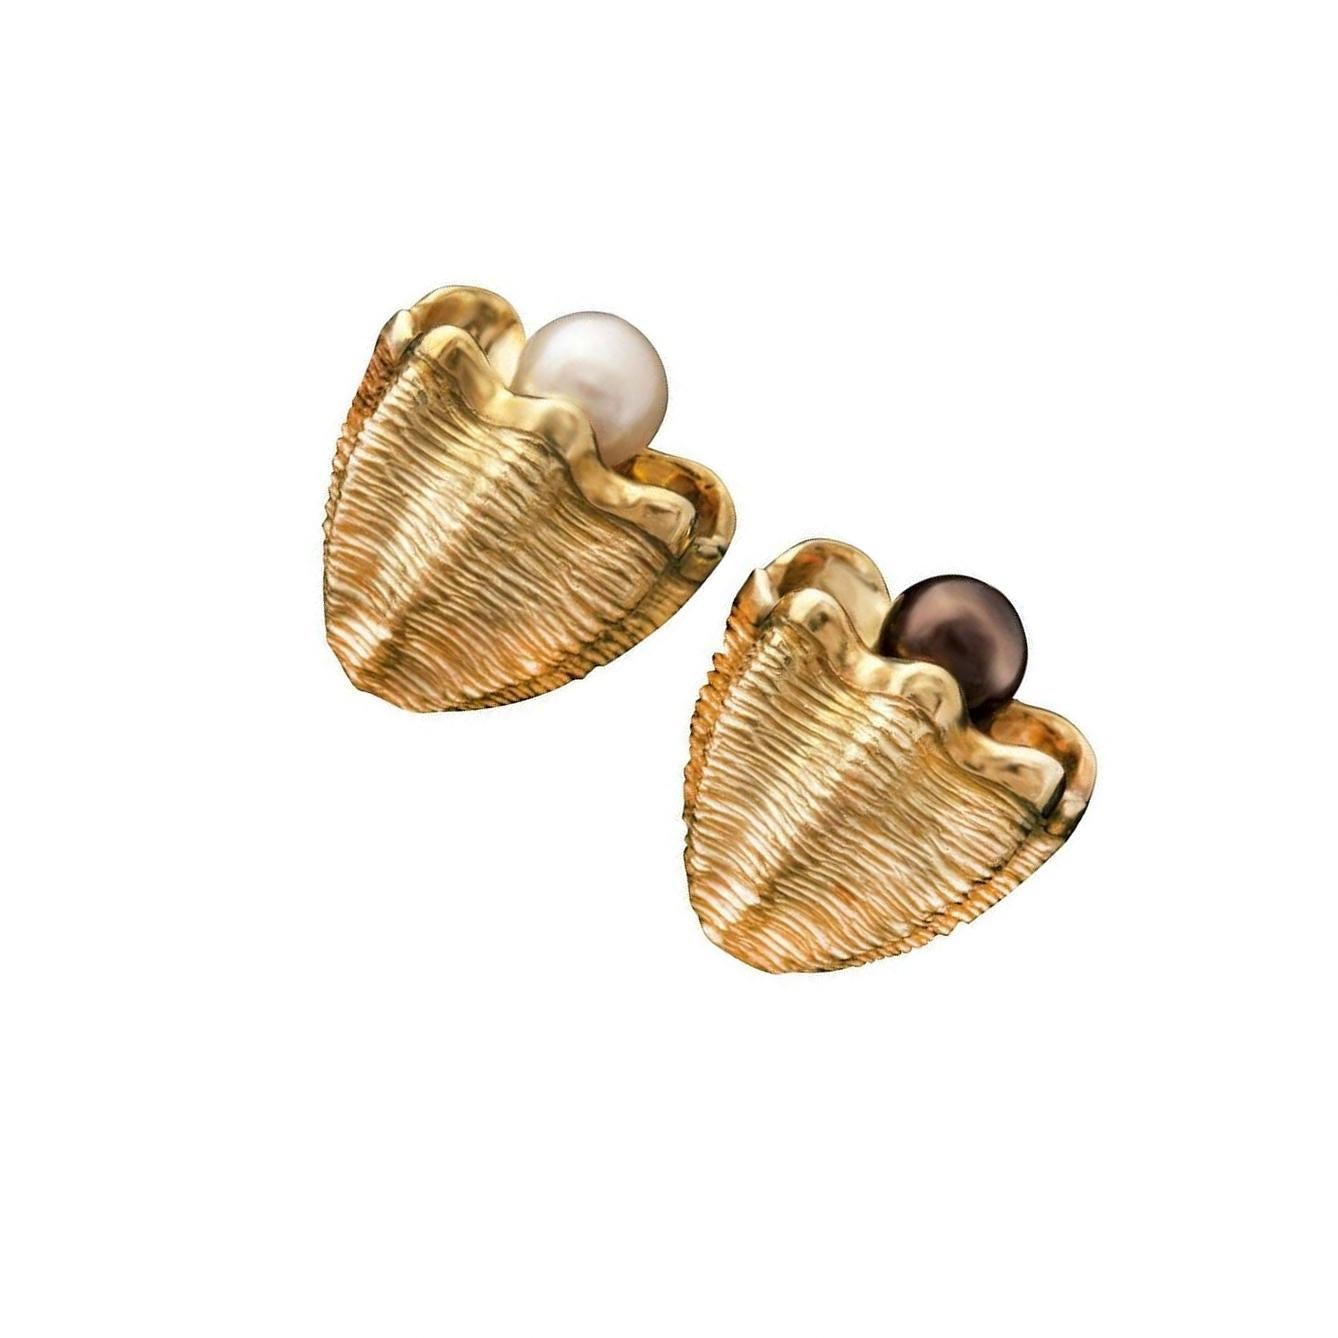 White and Black Pearl 18 Karat GIANT CLAM SHELL Earrings by John Landrum Bryant In New Condition For Sale In New York, NY